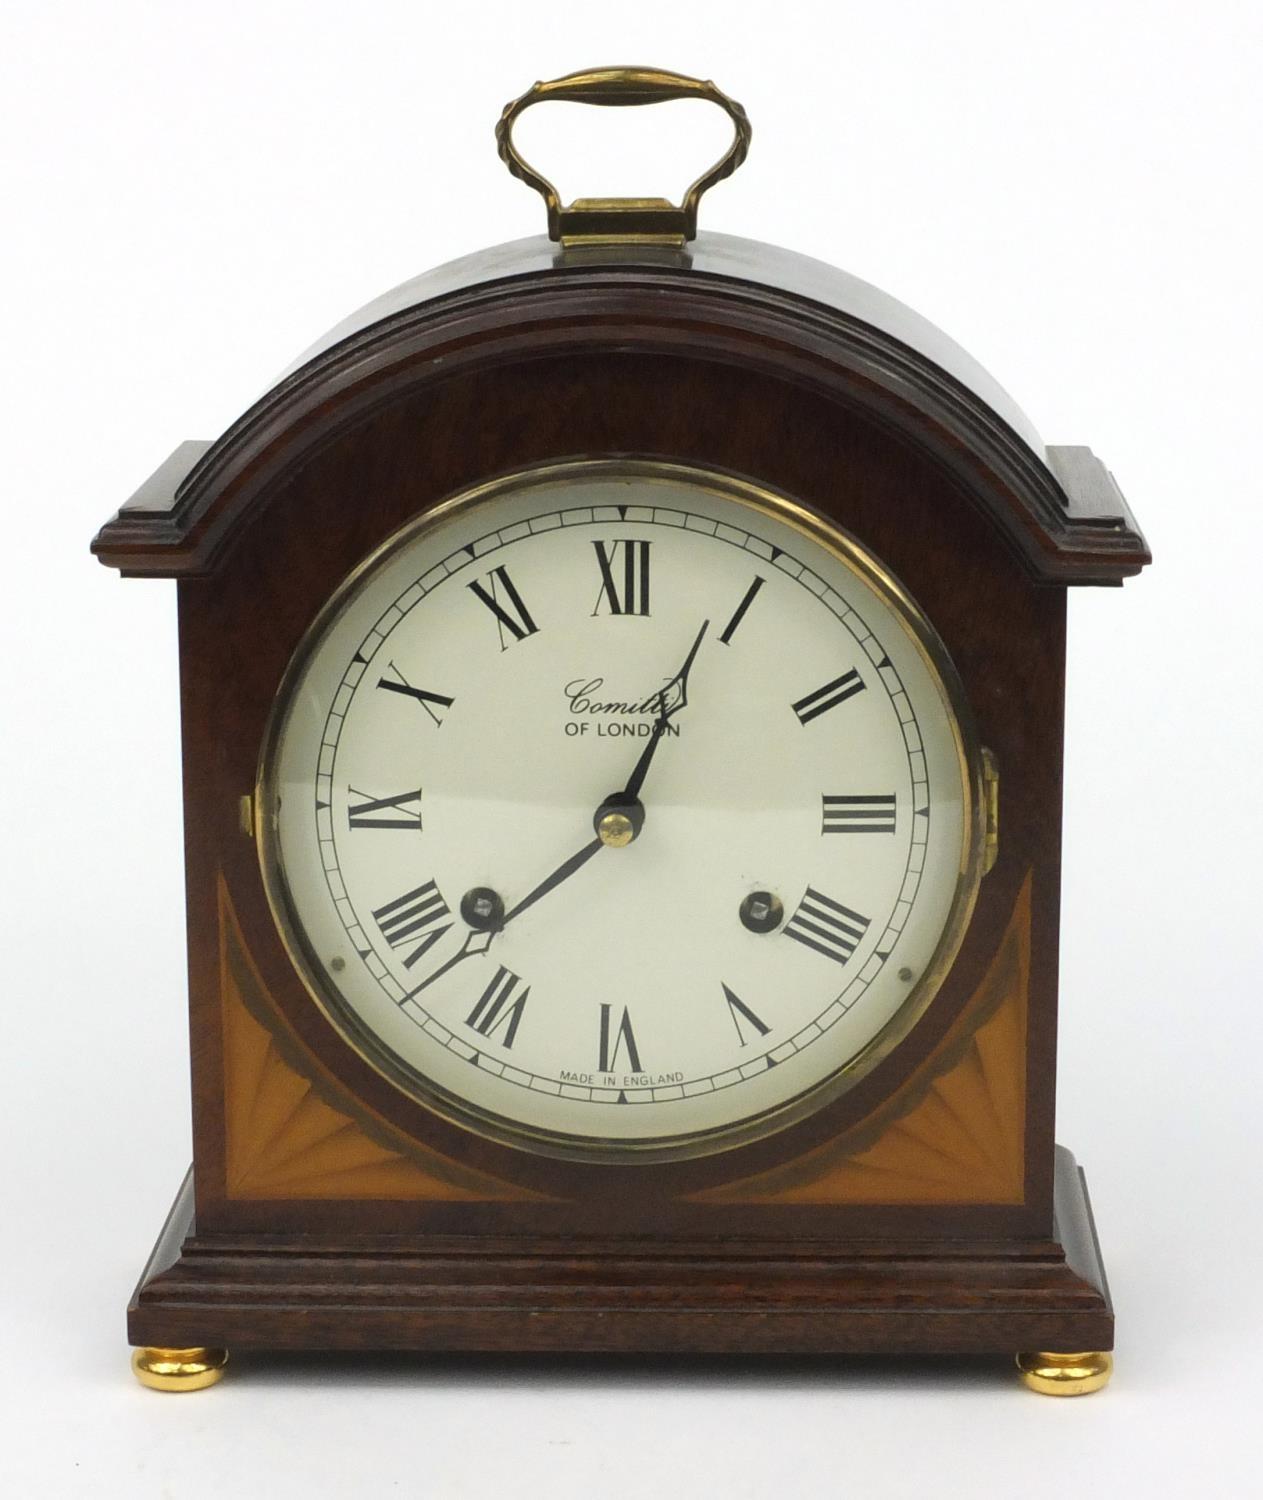 Inlaid mahogany Comitti of London mantel clock, with brass handle, 25cm high including the handle